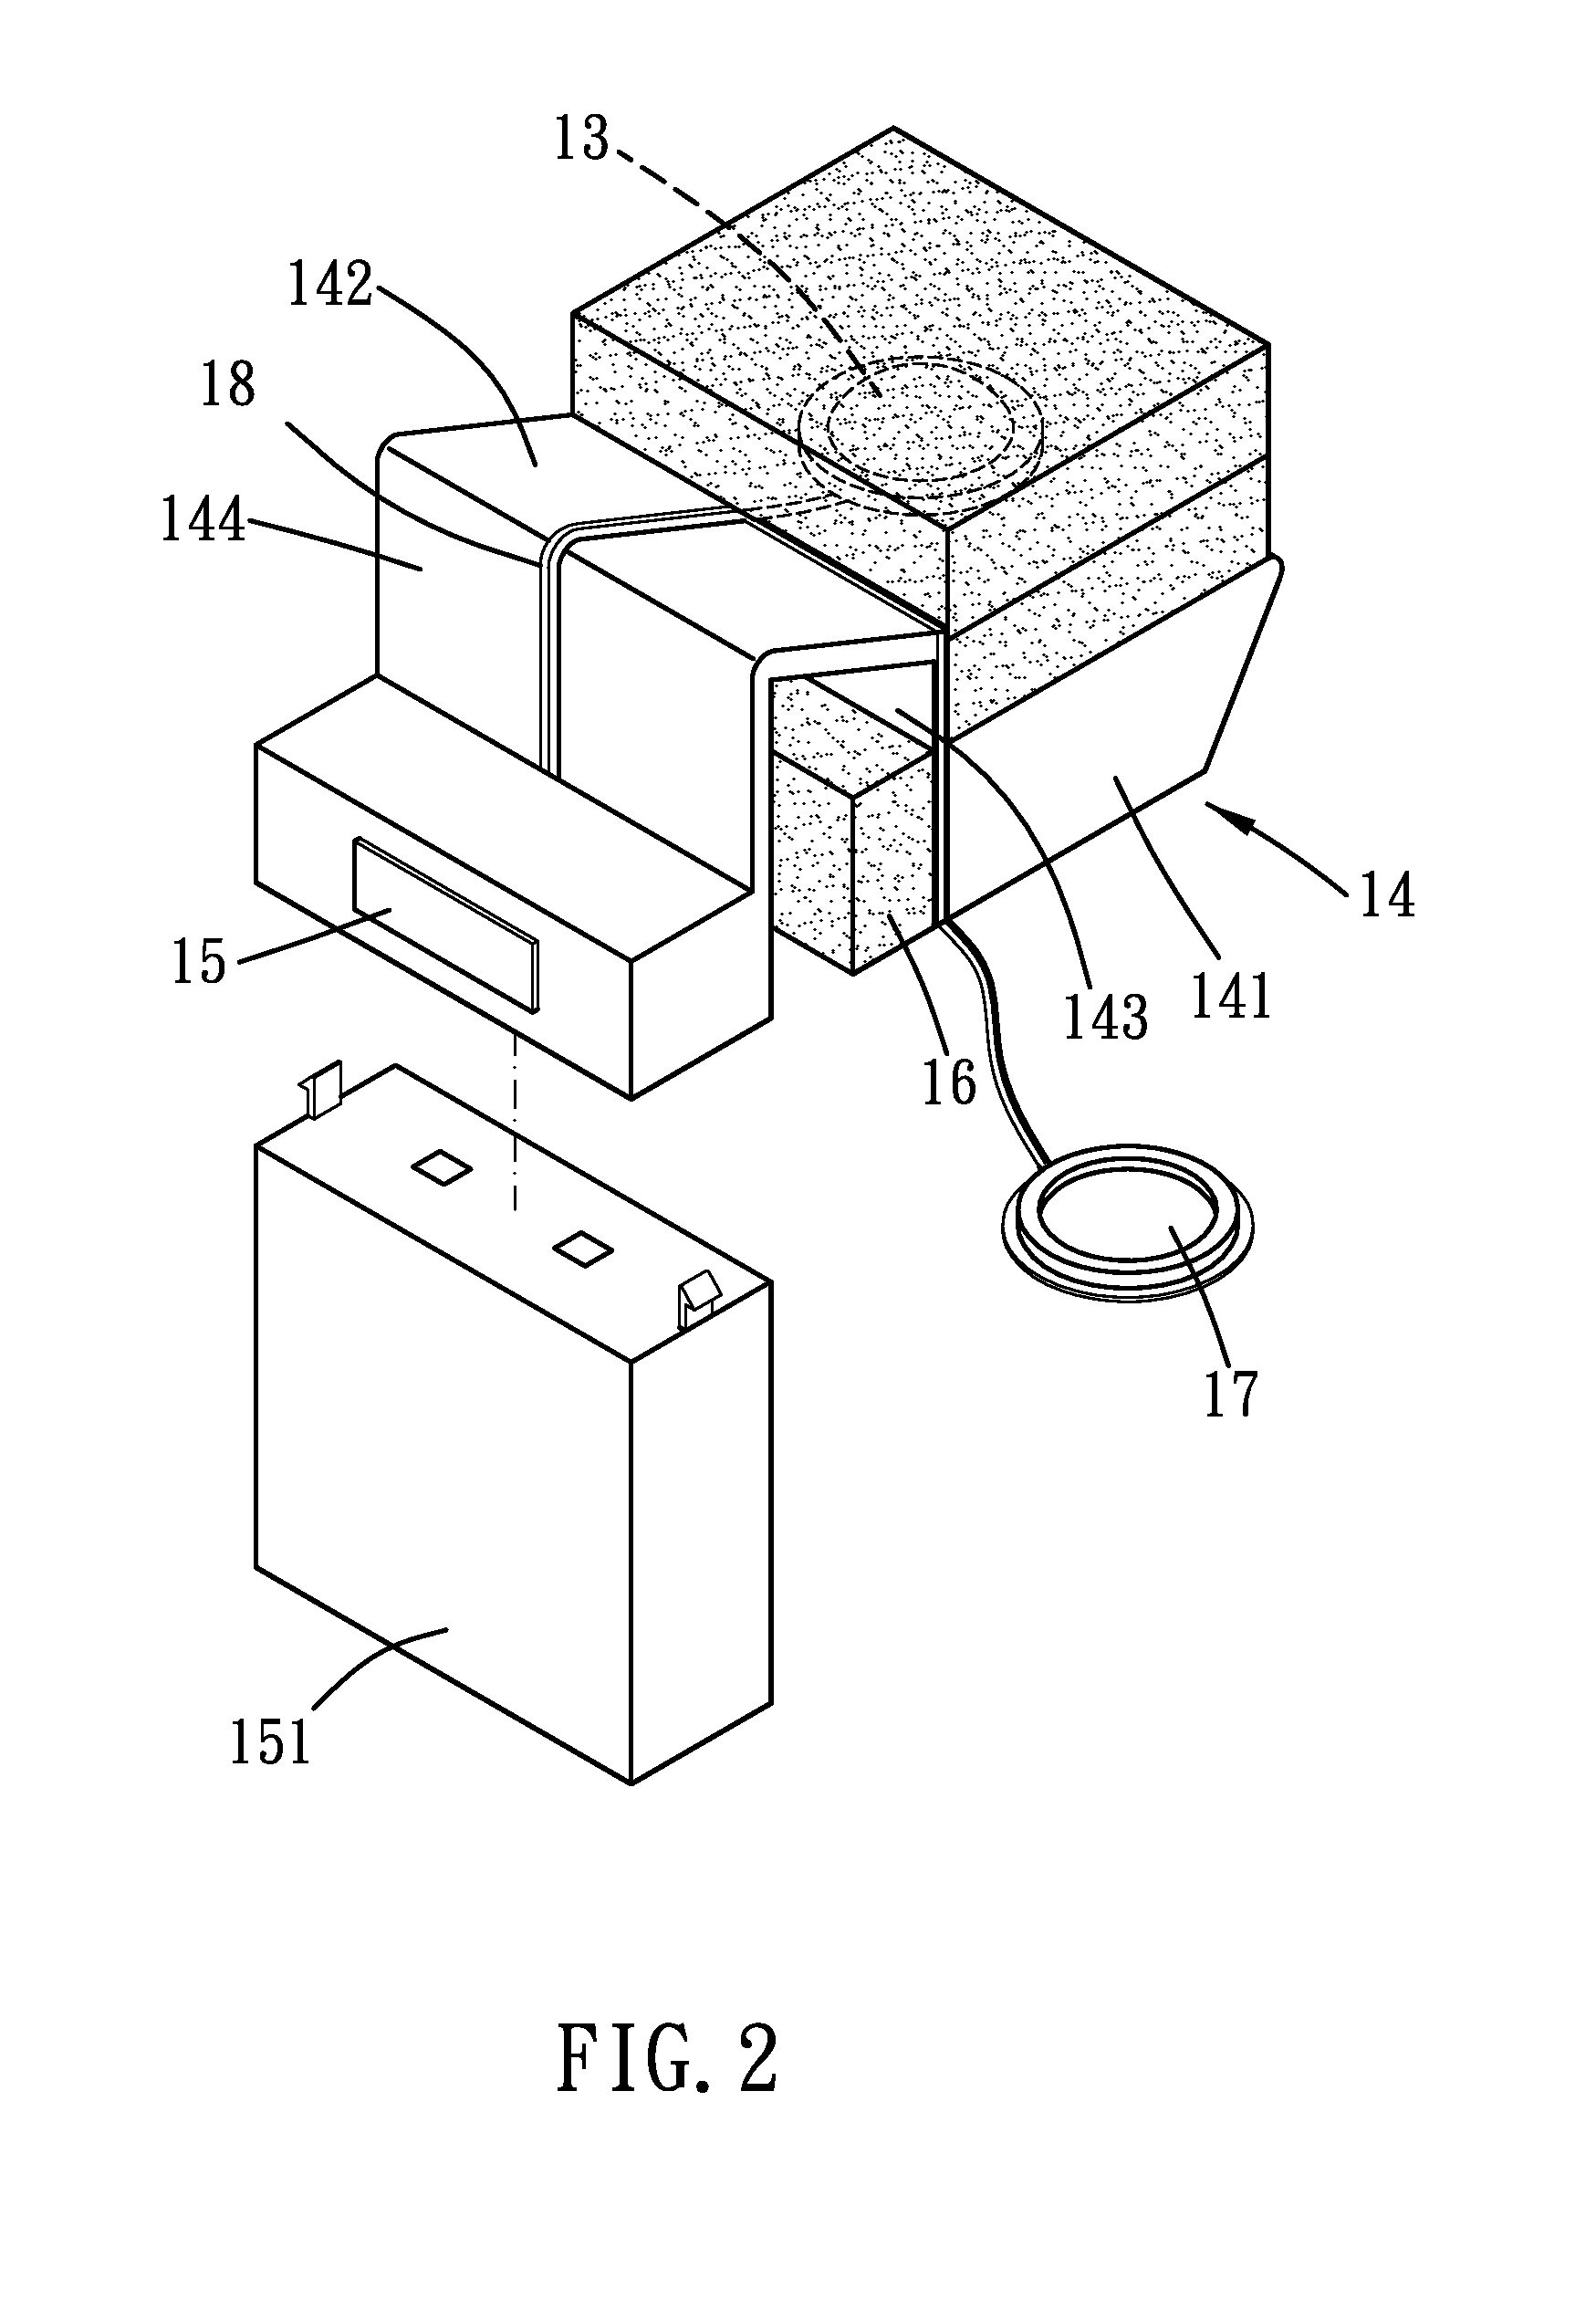 Signal transmitting device for drums